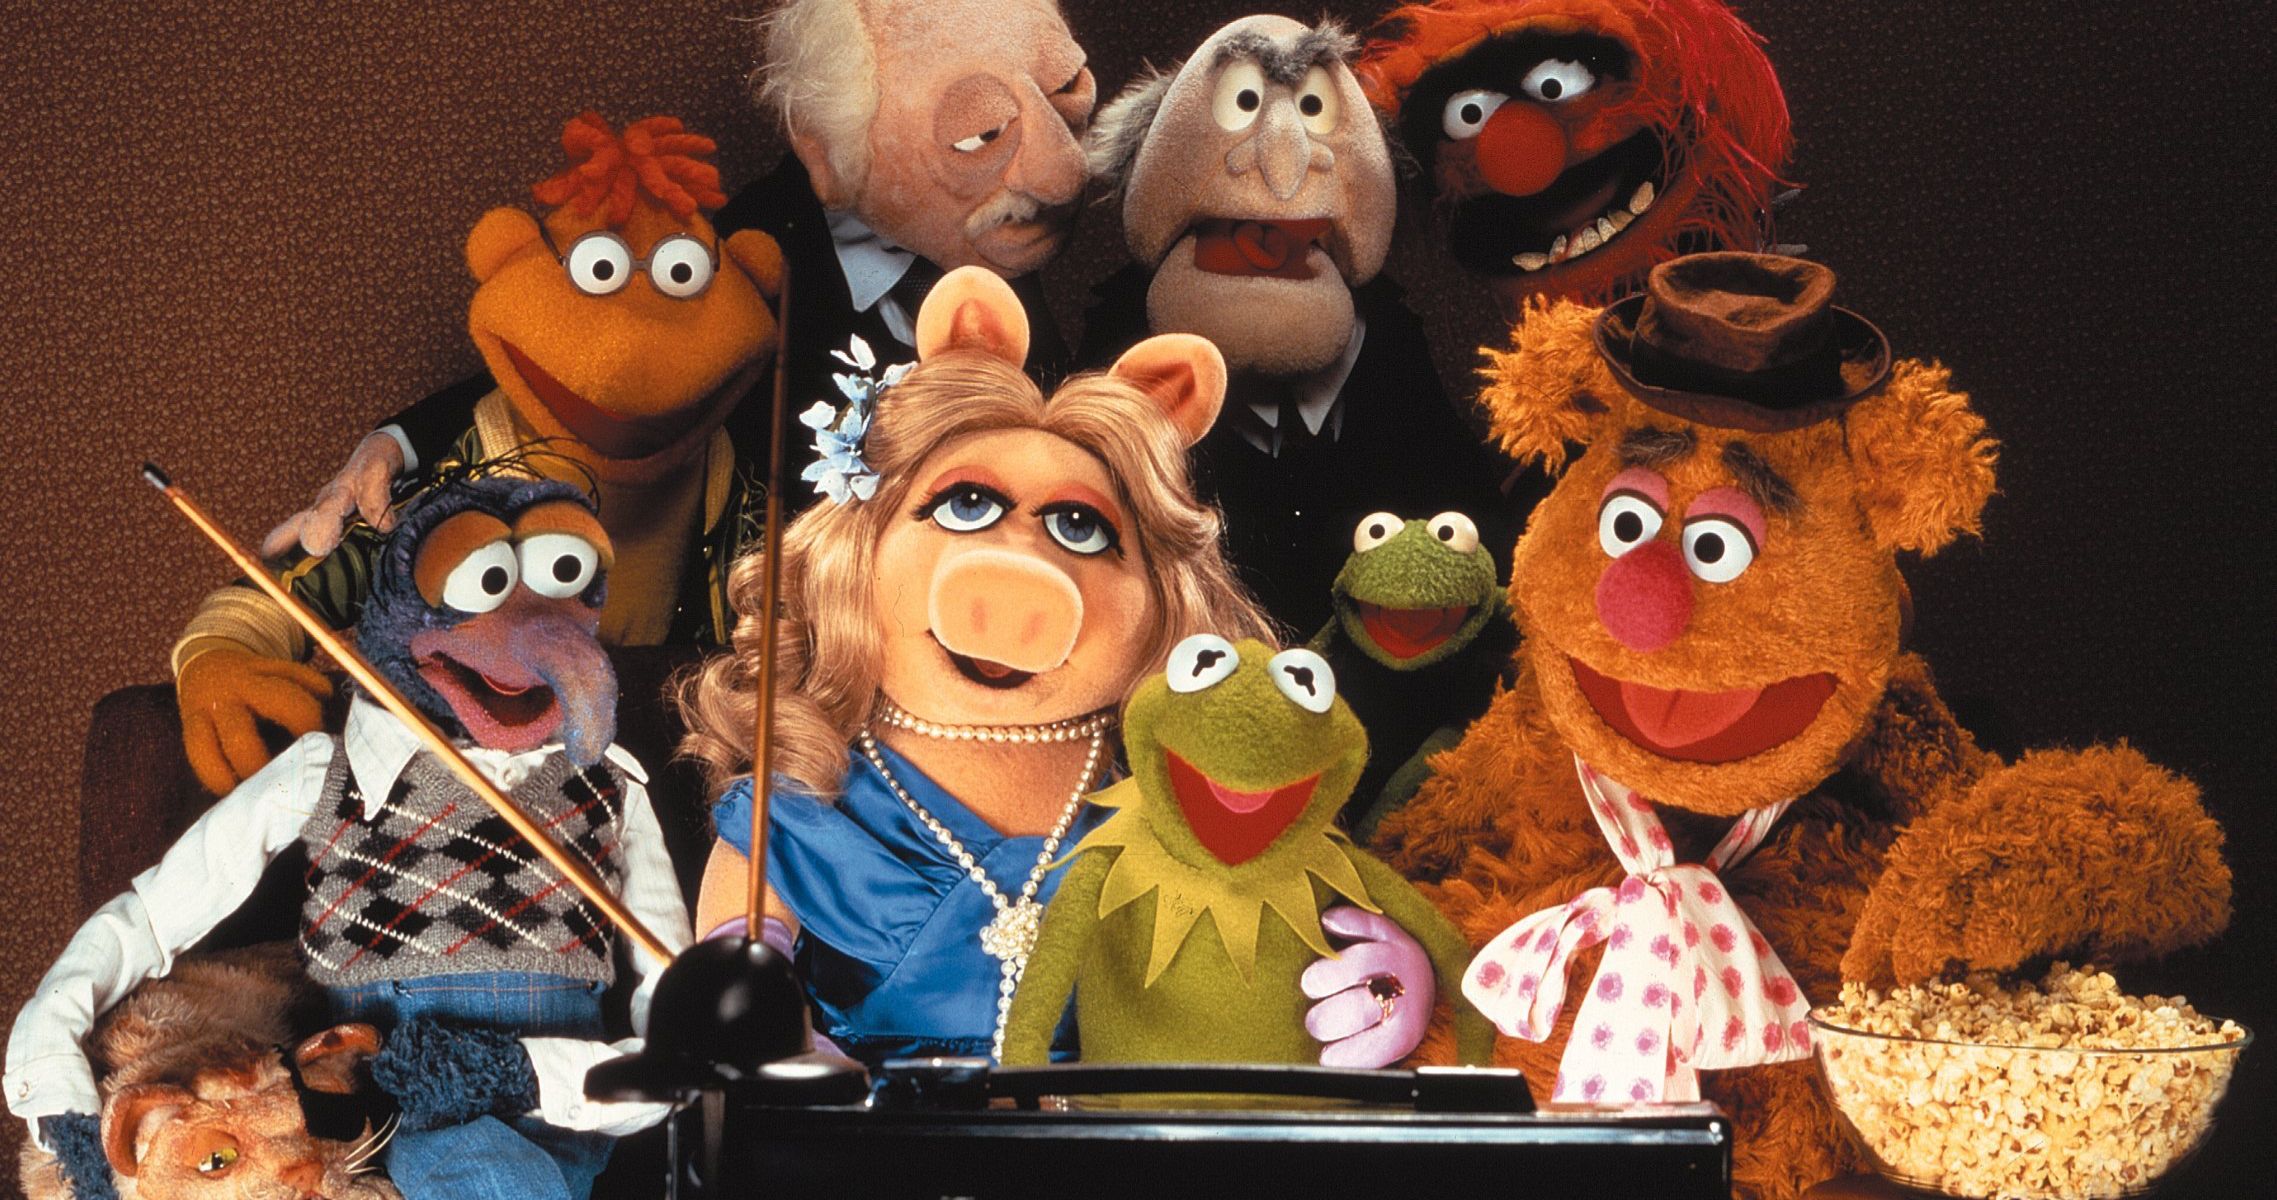 Muppets Now Trailer Brings Kermit and the Gang to Disney+ This Summer